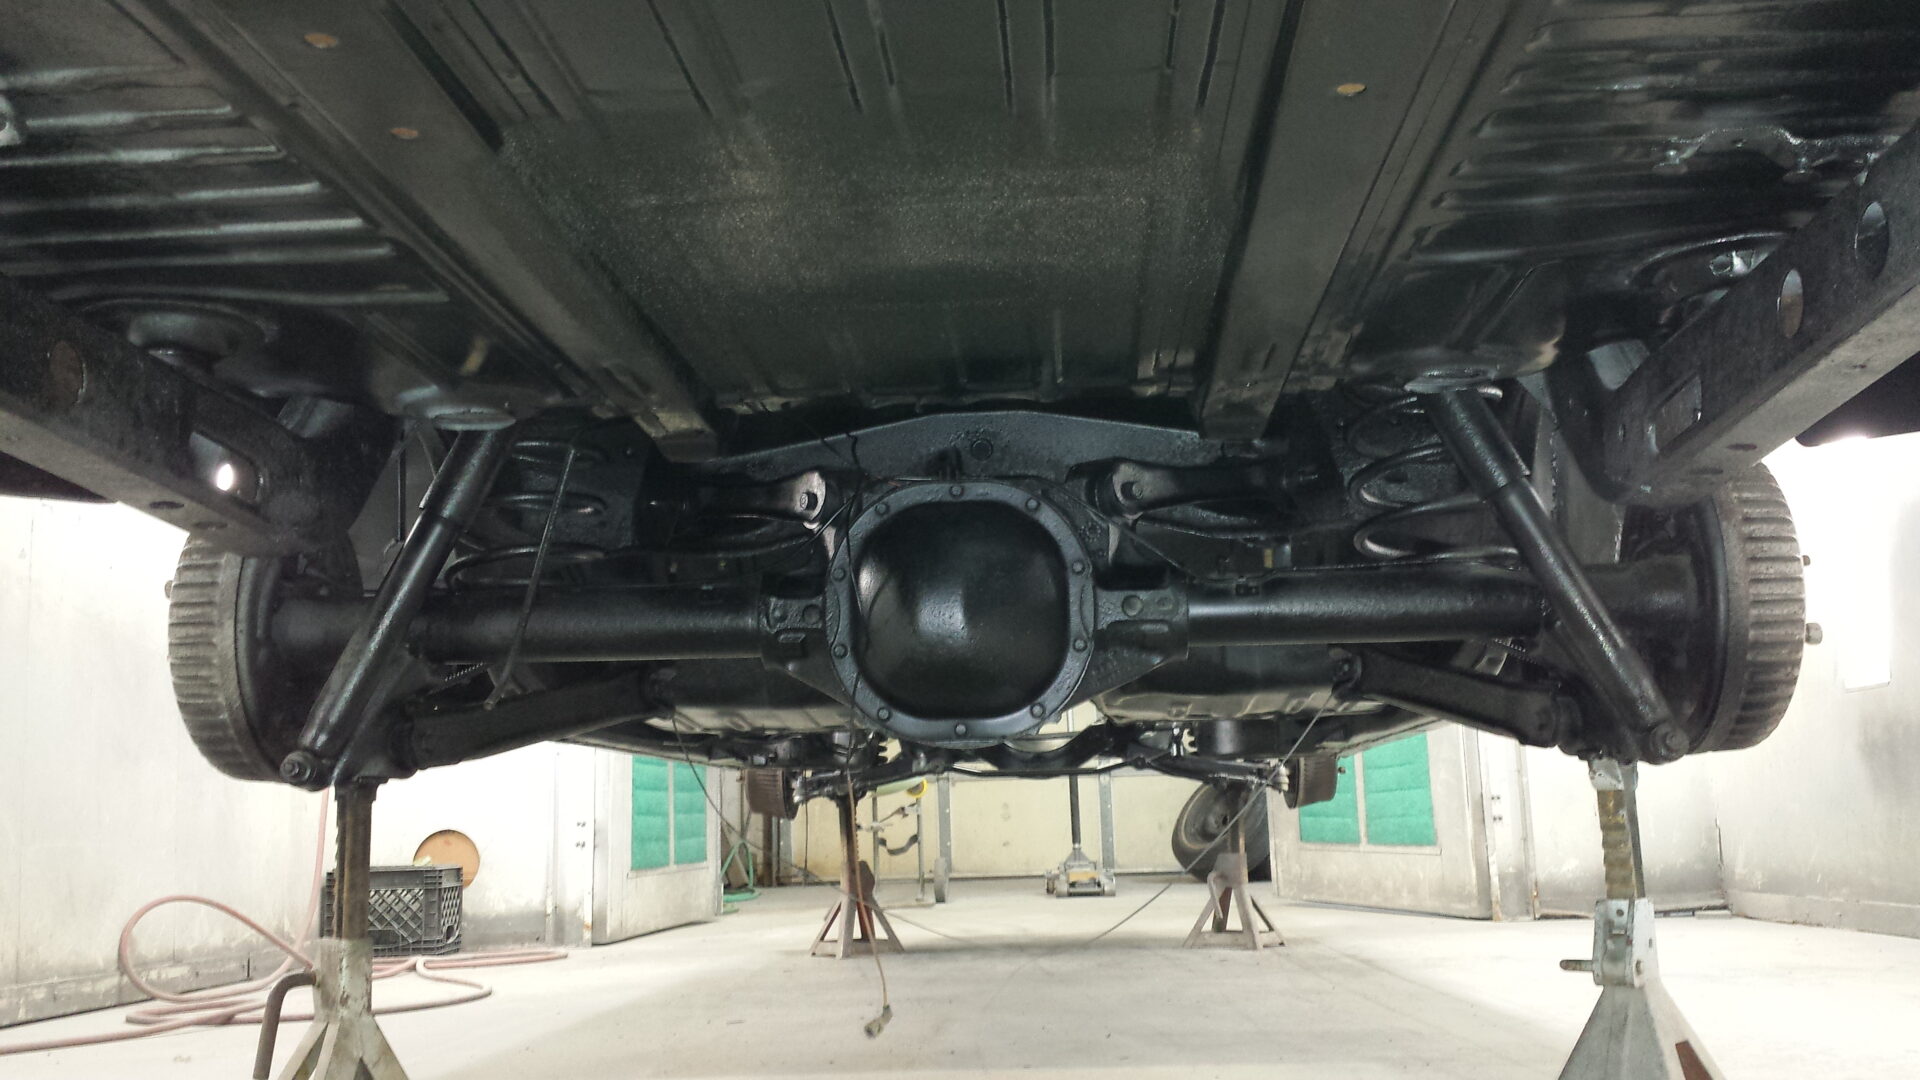 The underside of the 1965 Pontiac Grand Prix painted in black